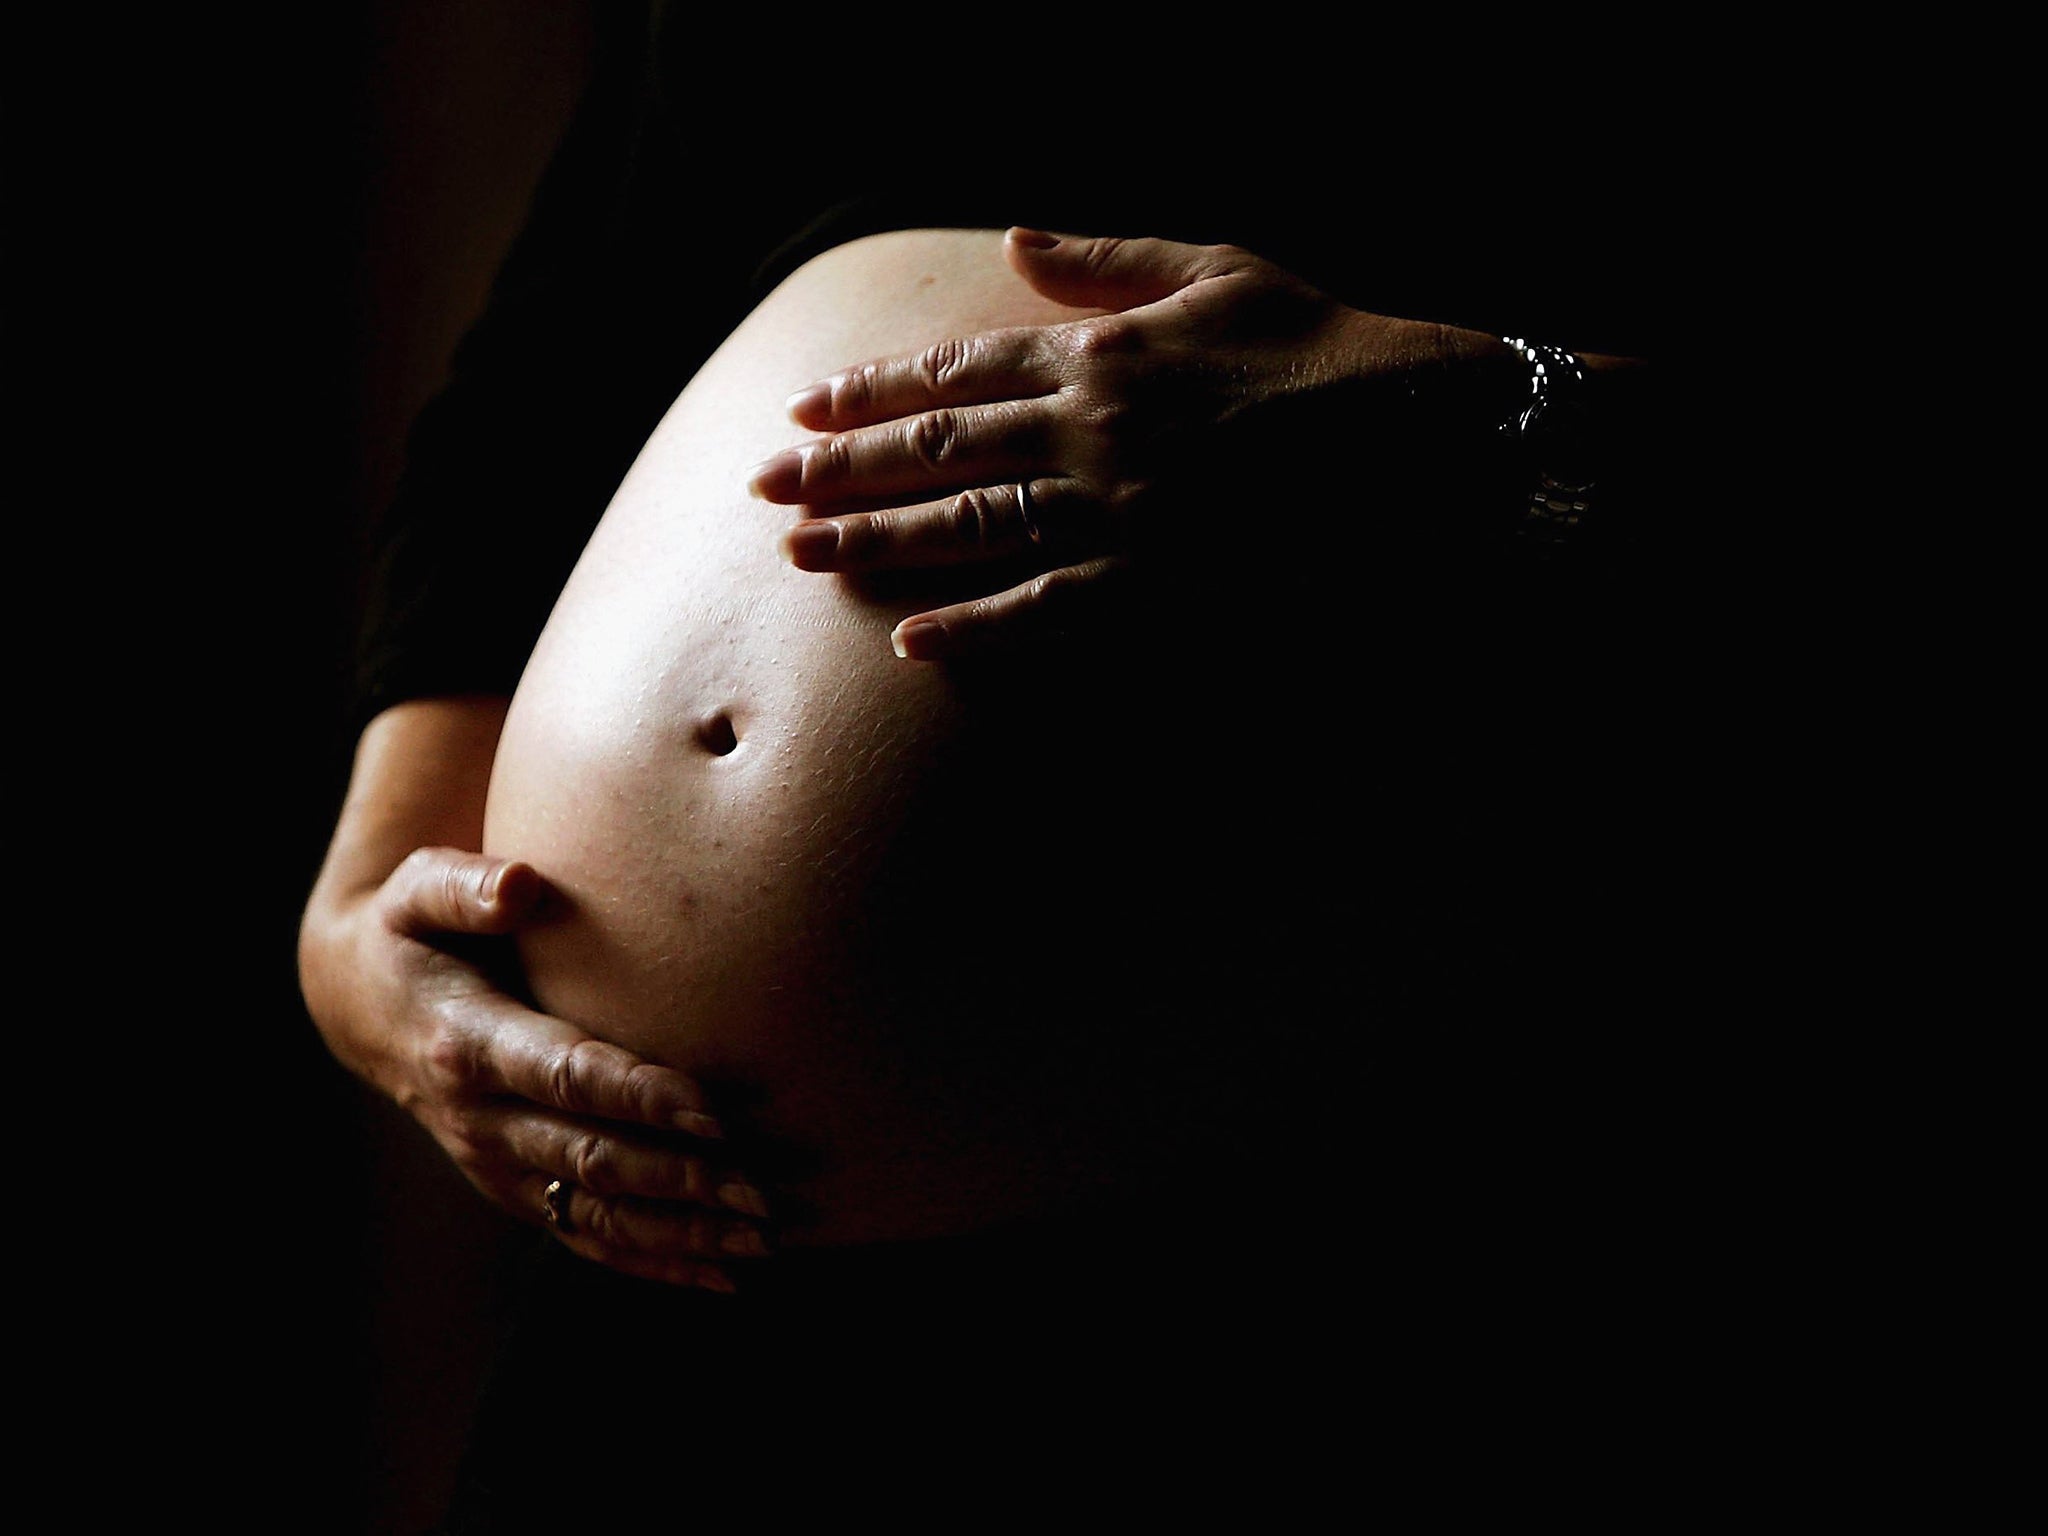 Campaigners are calling for “urgent action” from the Government and the NHS to ensure access to critical perinatal mental healthcare and to ensure that no pregnant woman has to survive on food banks or live on the street